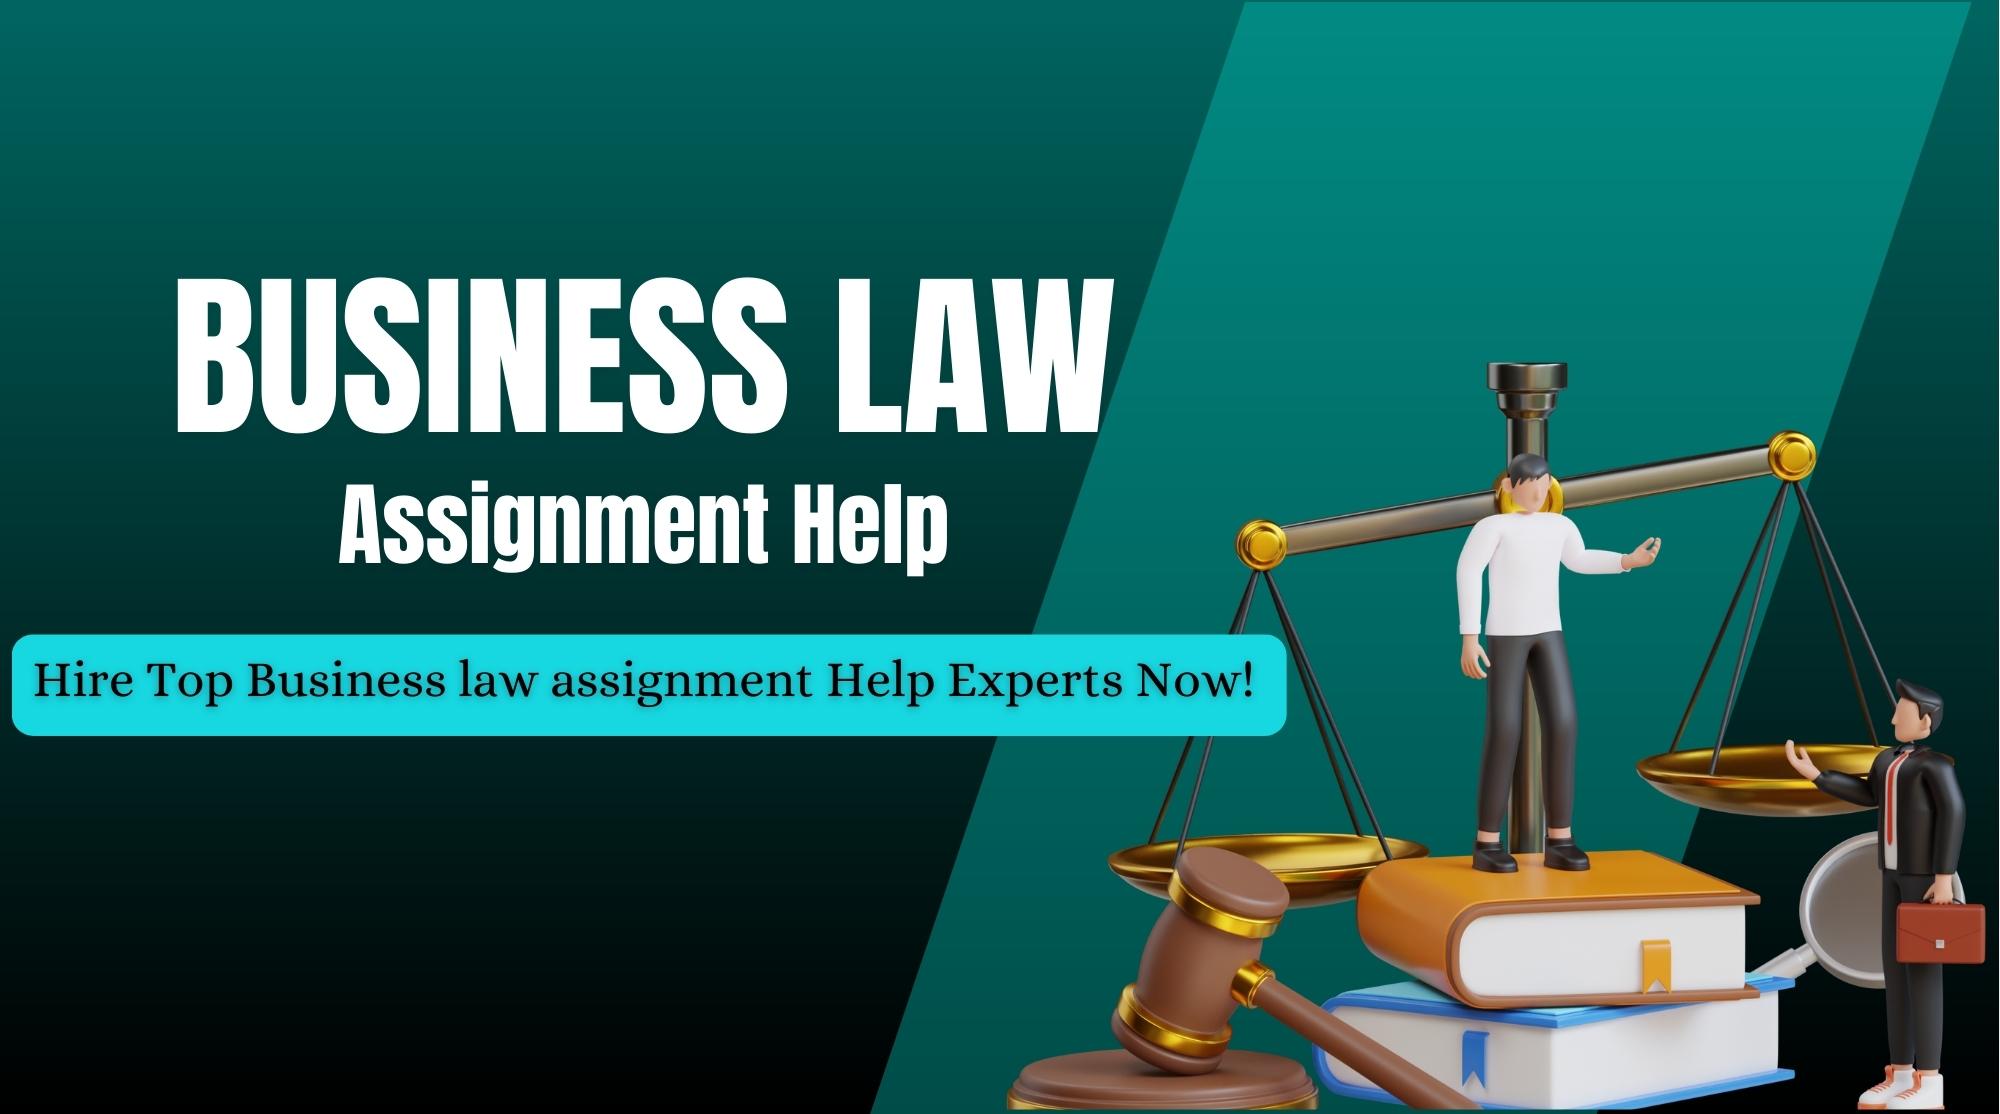 Business Law Assignment Help - Hire Law Experts